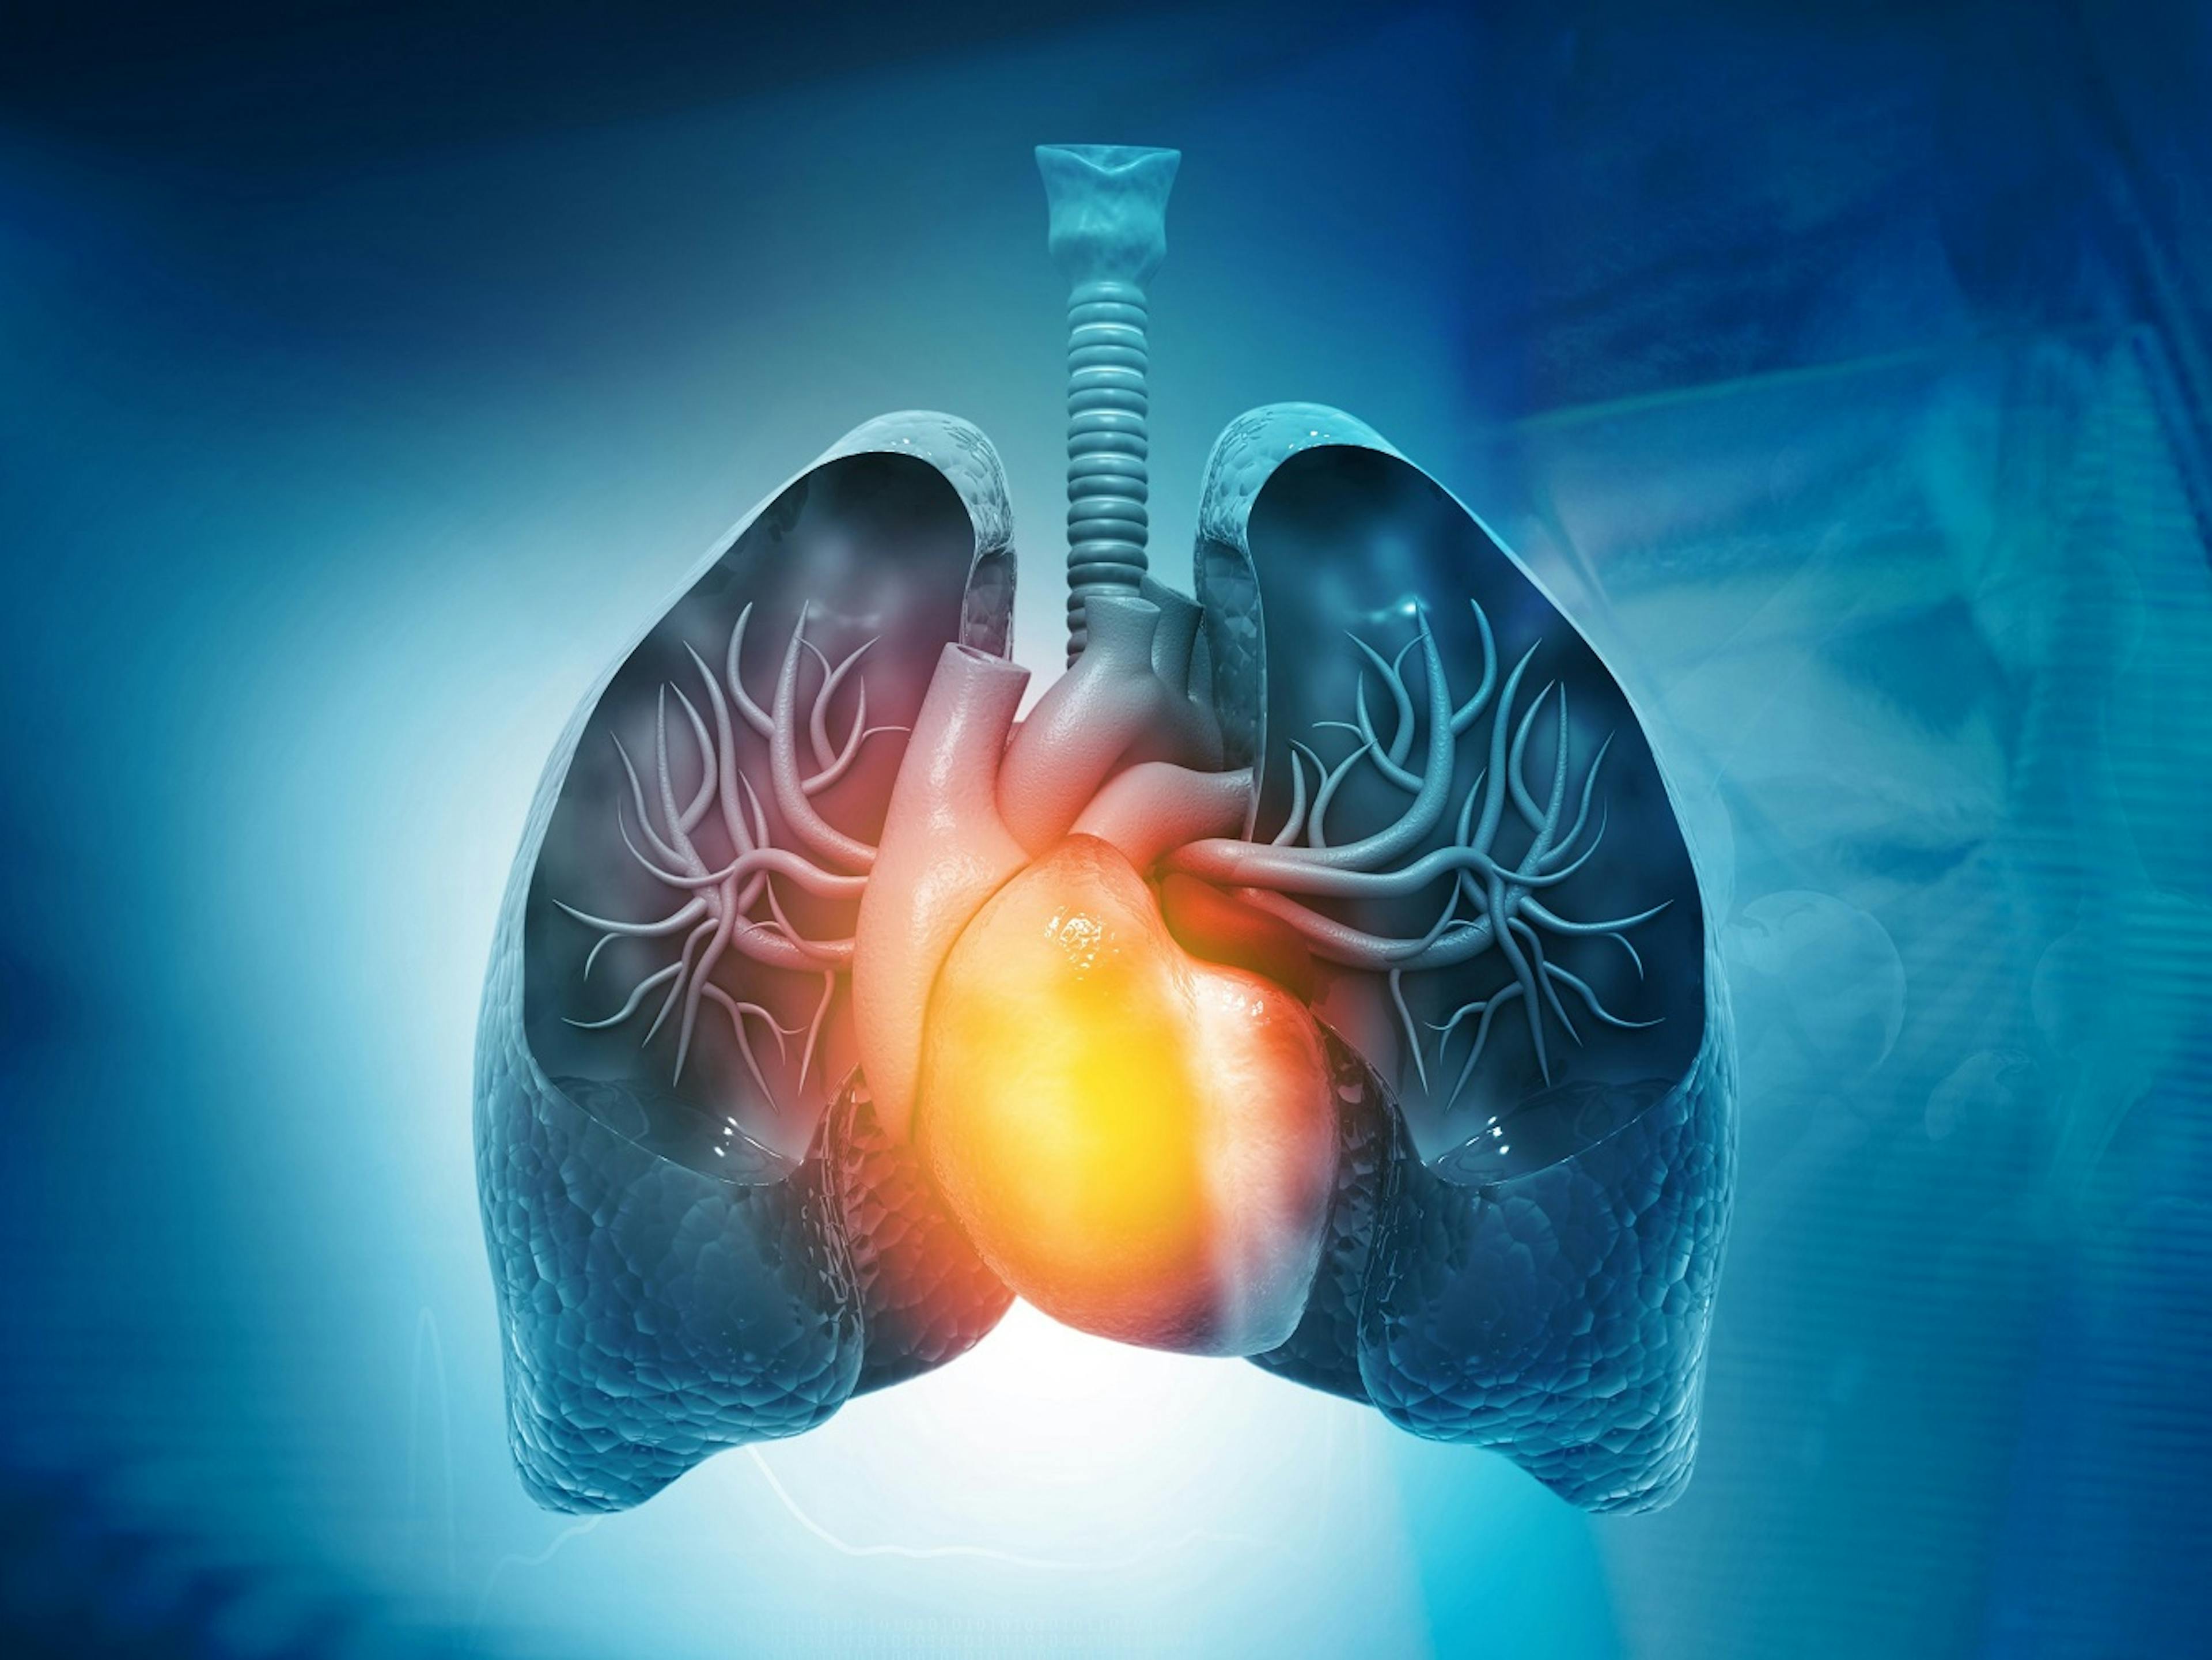 Does Medicare Cover a Lung Transplant?